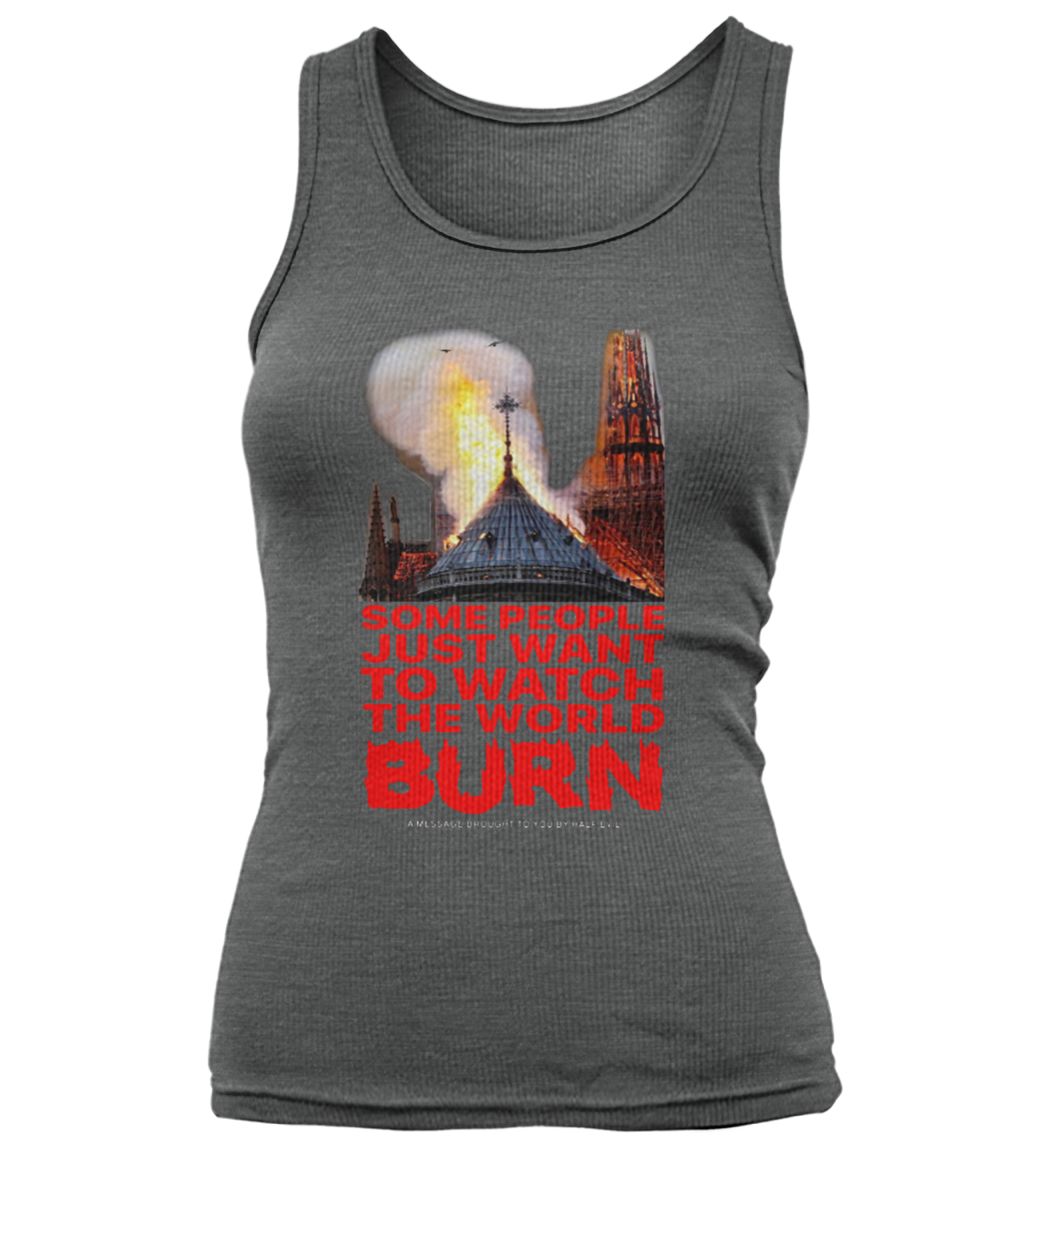 Some people just want to watch the world burn notre-dame de paris women's tank top